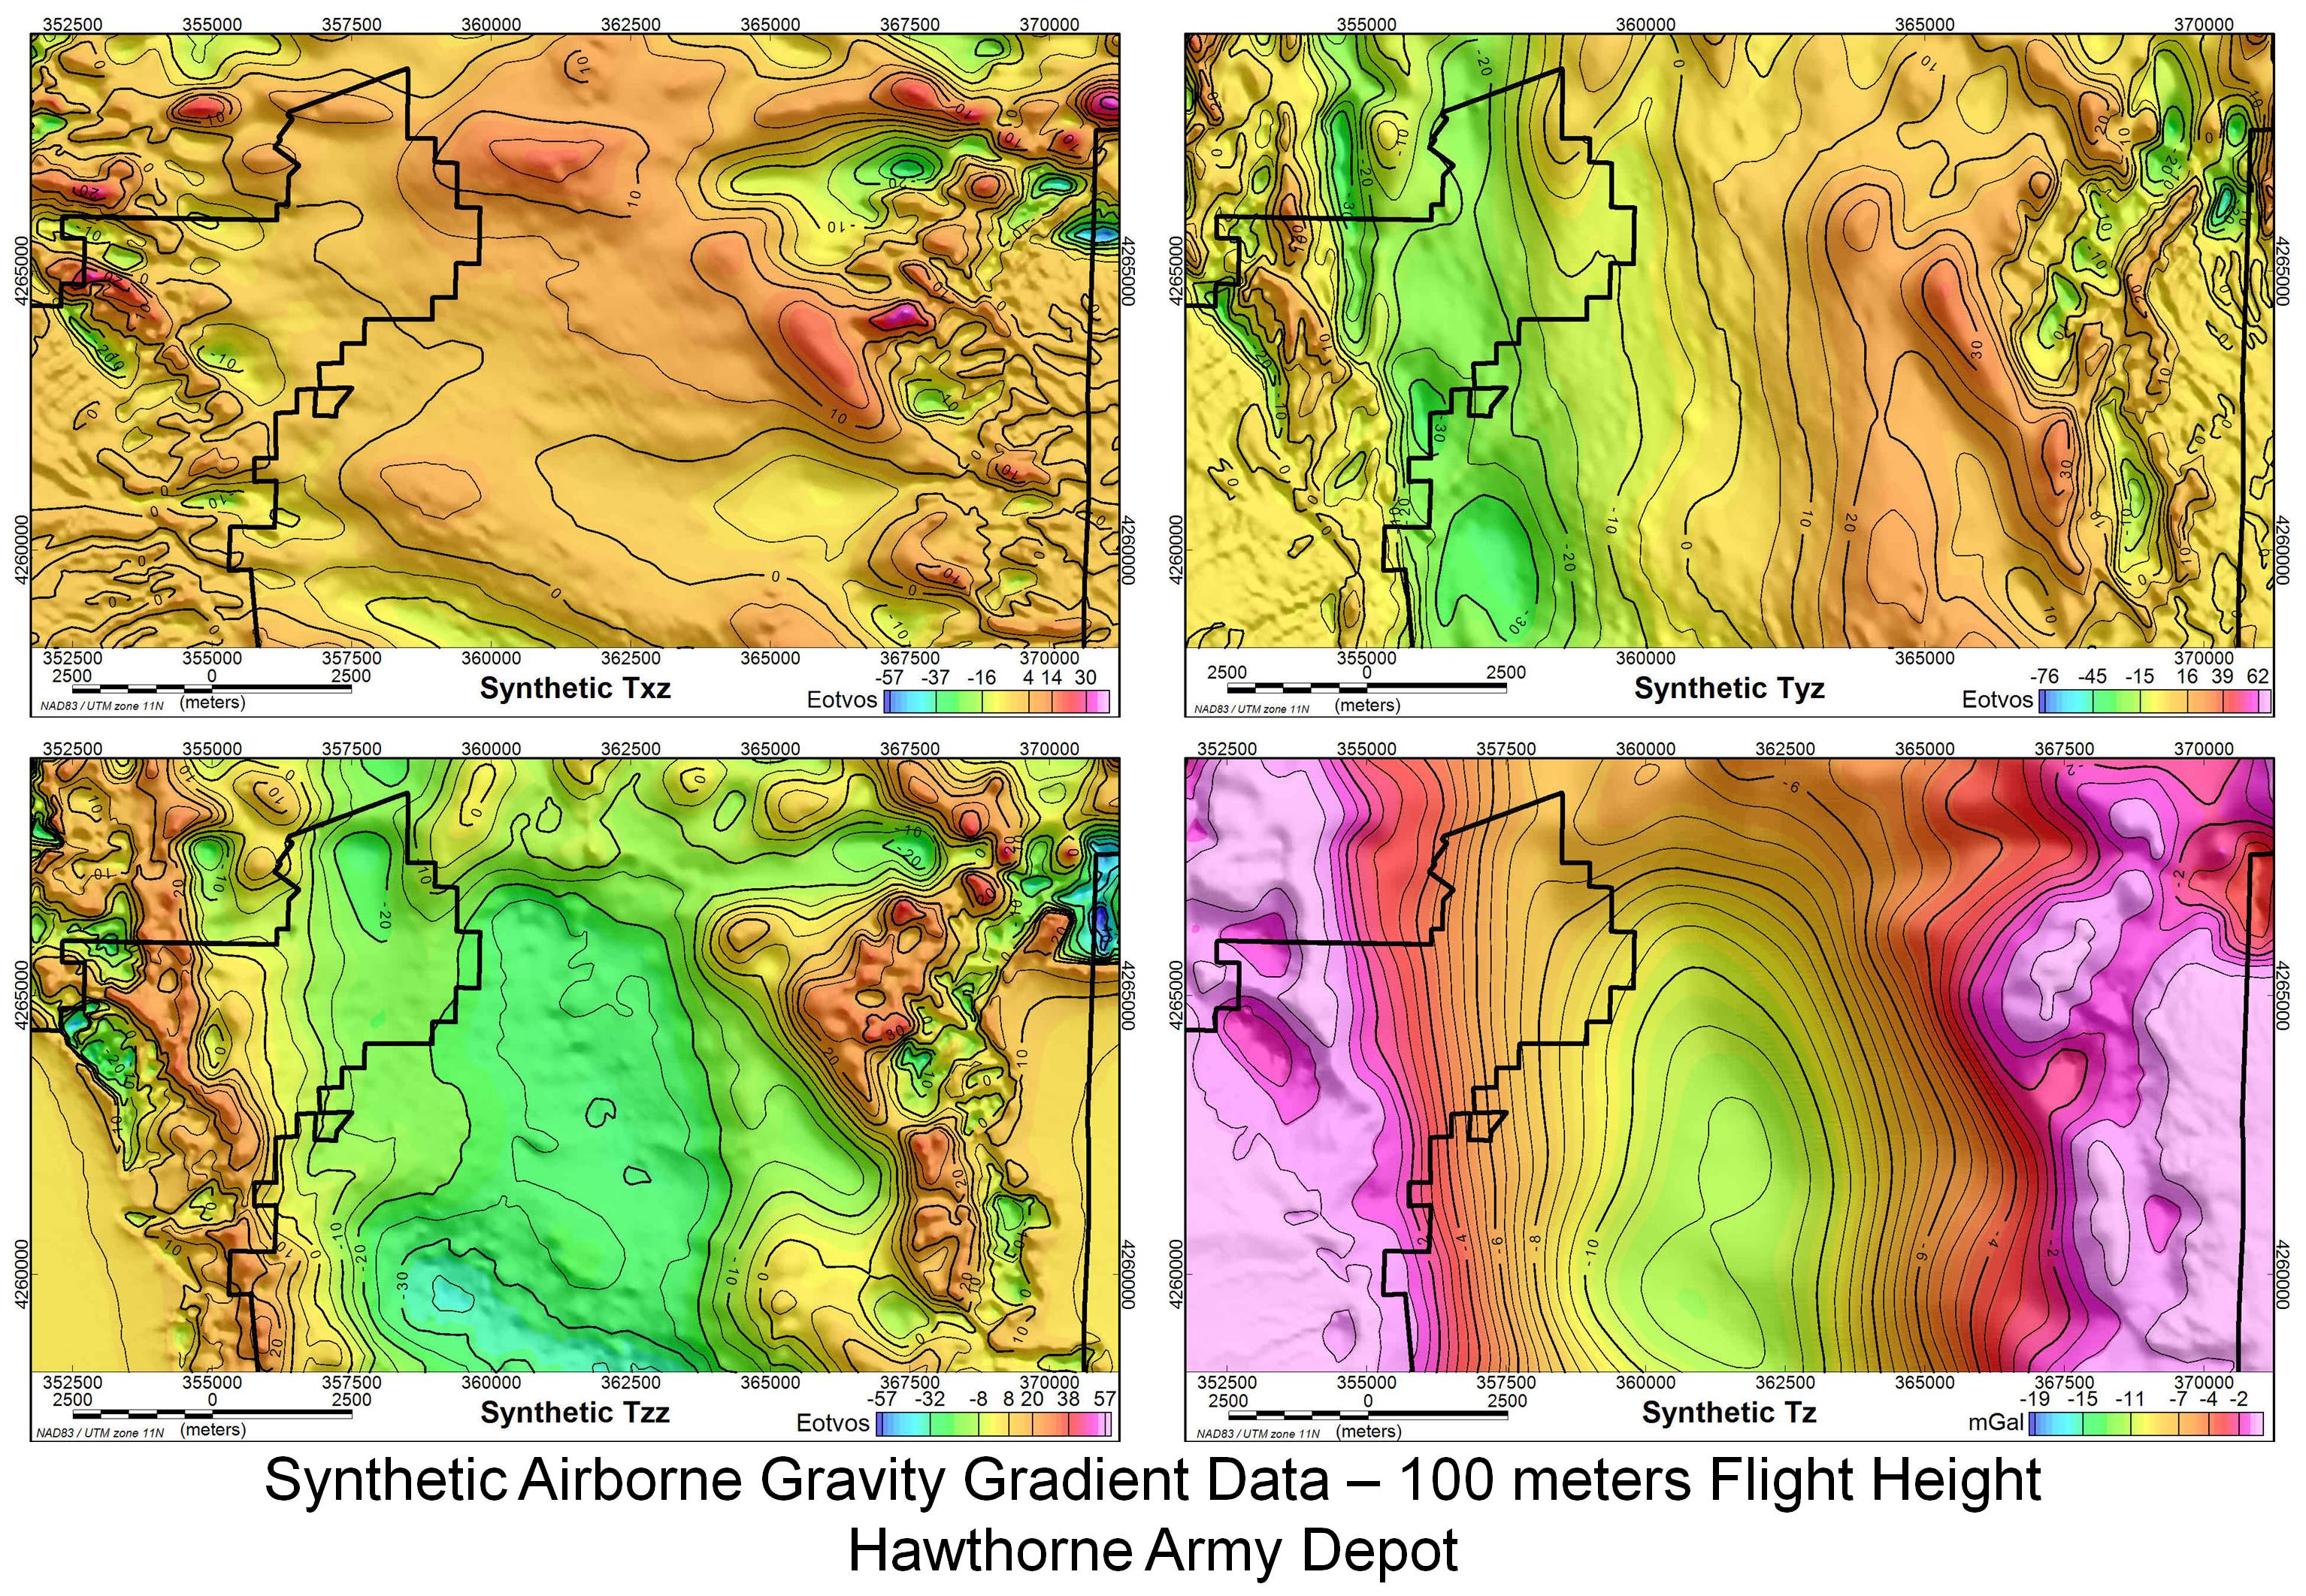 Synthetic airborne gravity gradient data at 100 meters flight height over southern Walker Lake basin, Mineral County, Nevada. (upper-left) Txz model from 3D basin. (upper-right) Tyz model from 3D basin. (lower-left) Tzz model from 3D basin. (lower-right) Tz model from 3D basin.